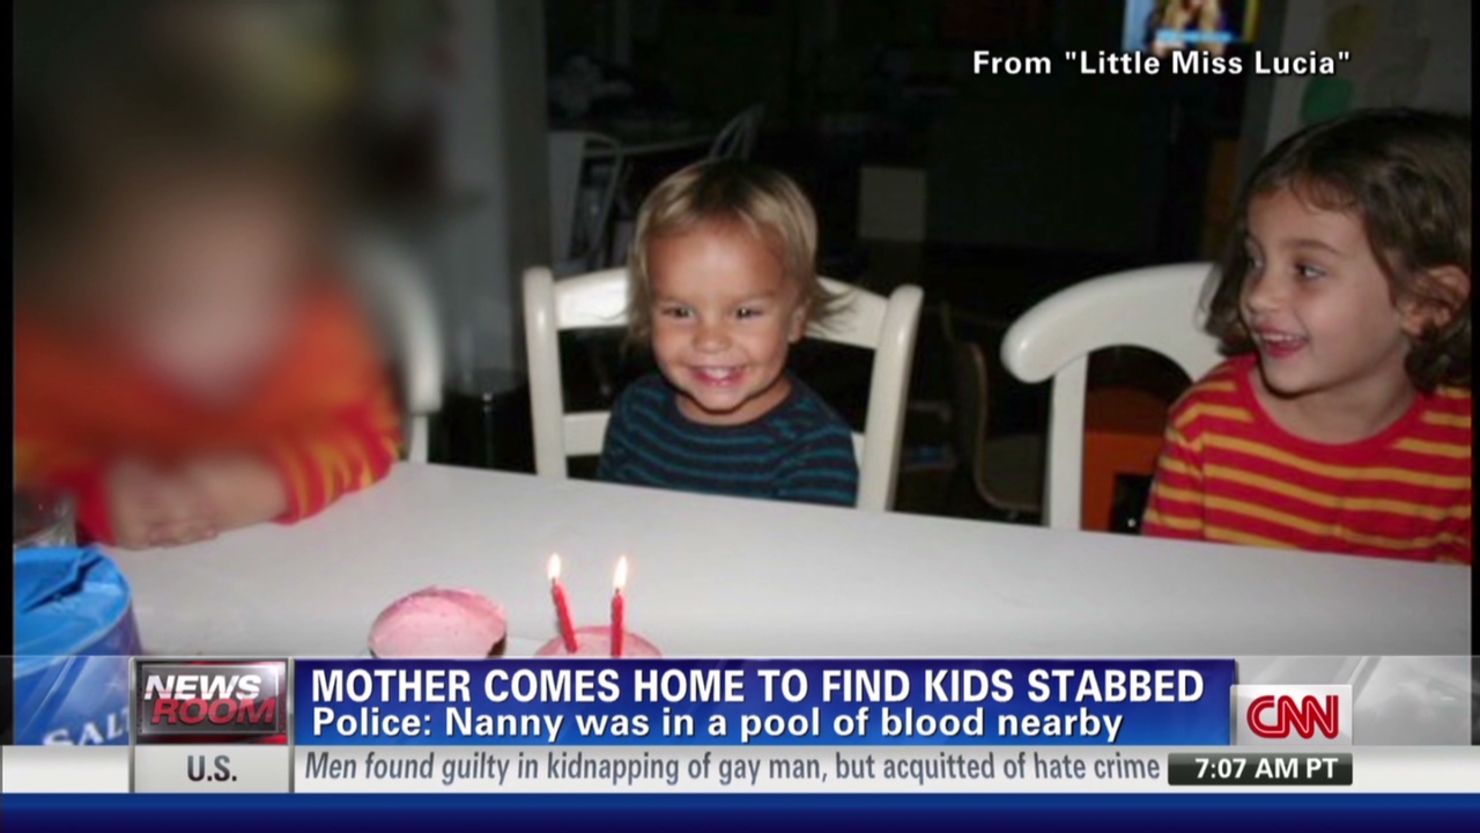 Leo and Lulu Krim, ages 2 and 6, were stabbed to death in their New York City home in October. Their nanny is charged.